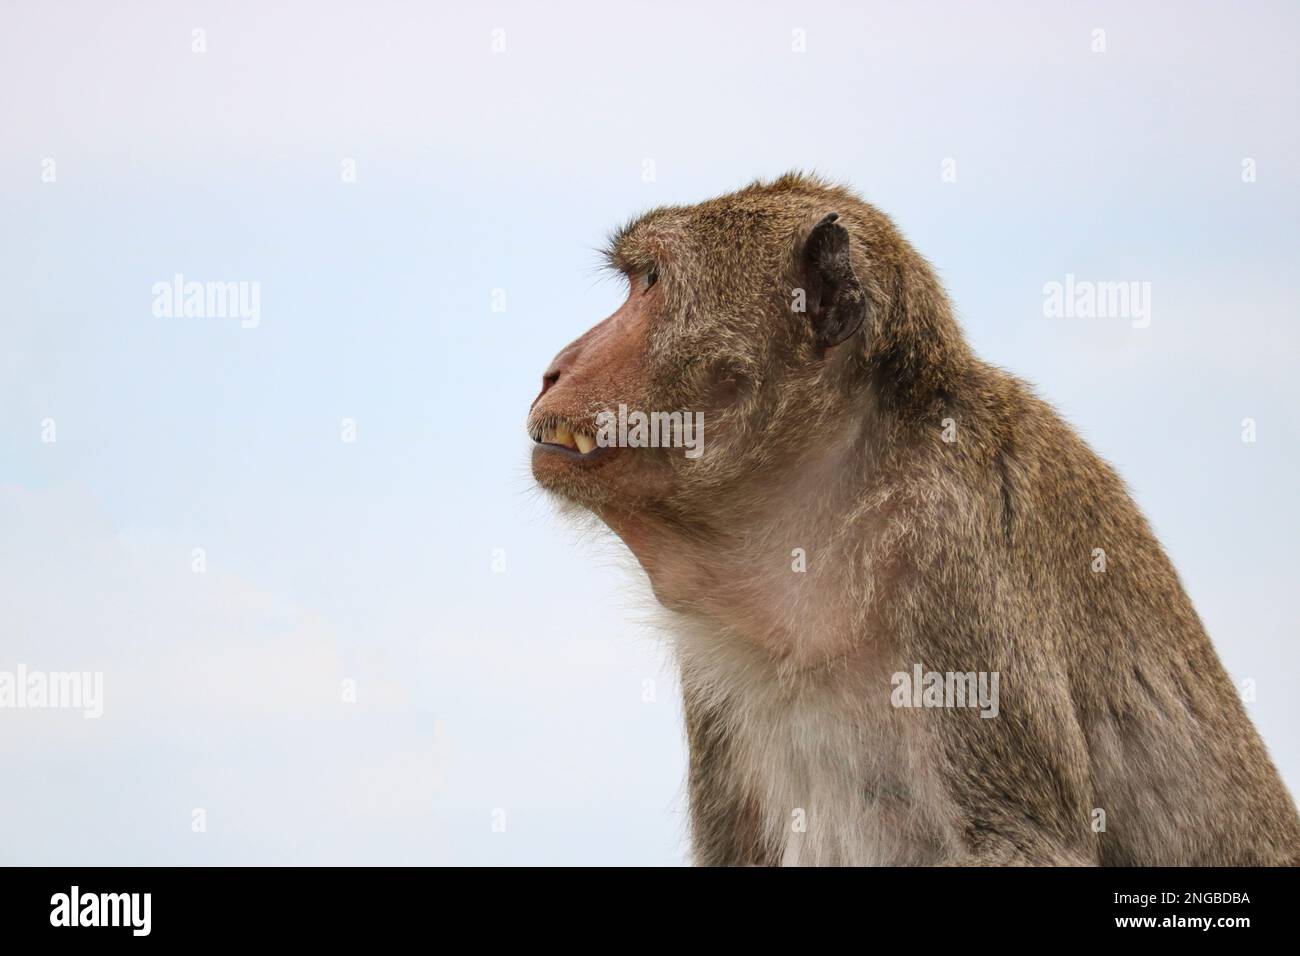 Adult male macaque in profile. A monkey grinning is a sign of aggression. Monkeys in the wild. Stock Photo